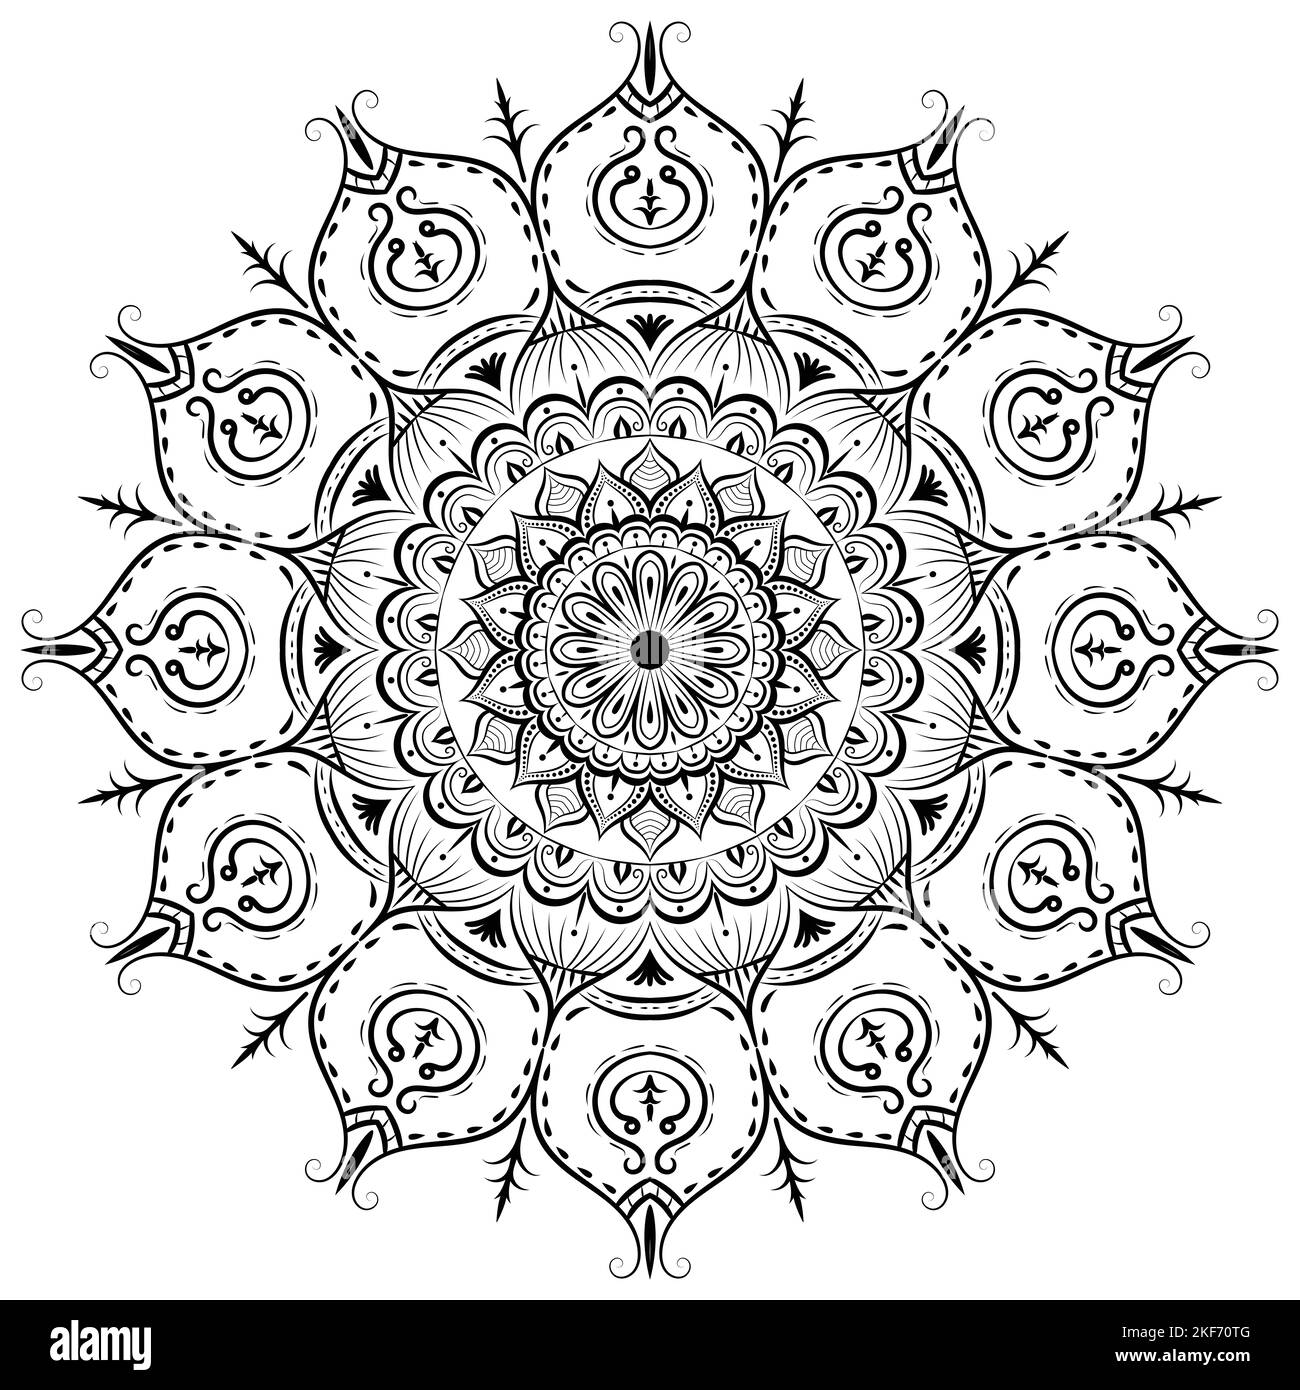 Beautiful floral pattern mandala art isolated on a white background, decoration elements for meditation poster or banner, festival mandala art Stock Photo